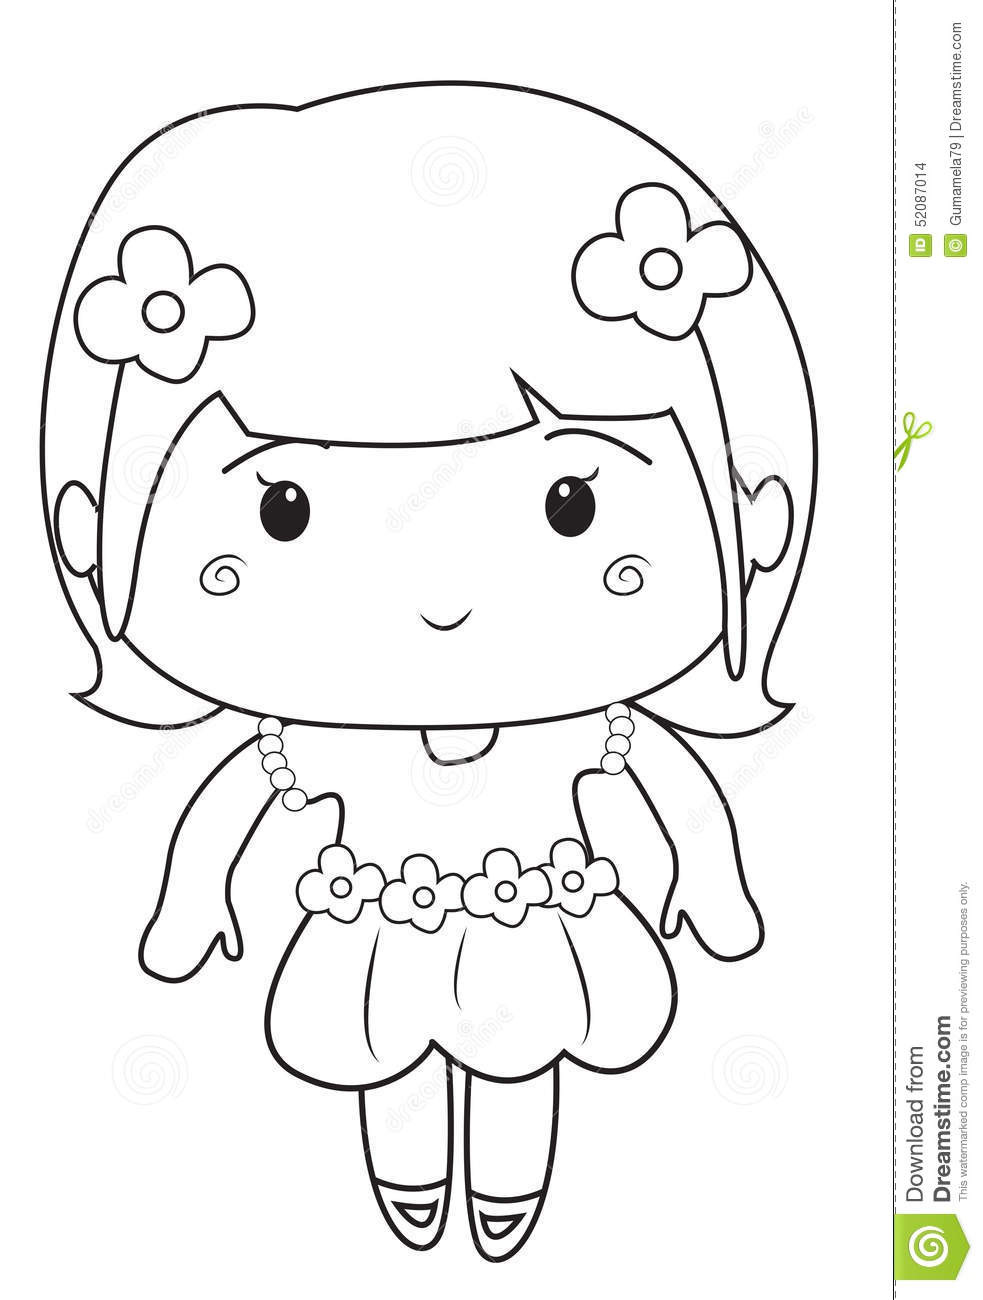 Coloring Books For Little Girls
 Little Girl Wearing A Dress Coloring Page Stock